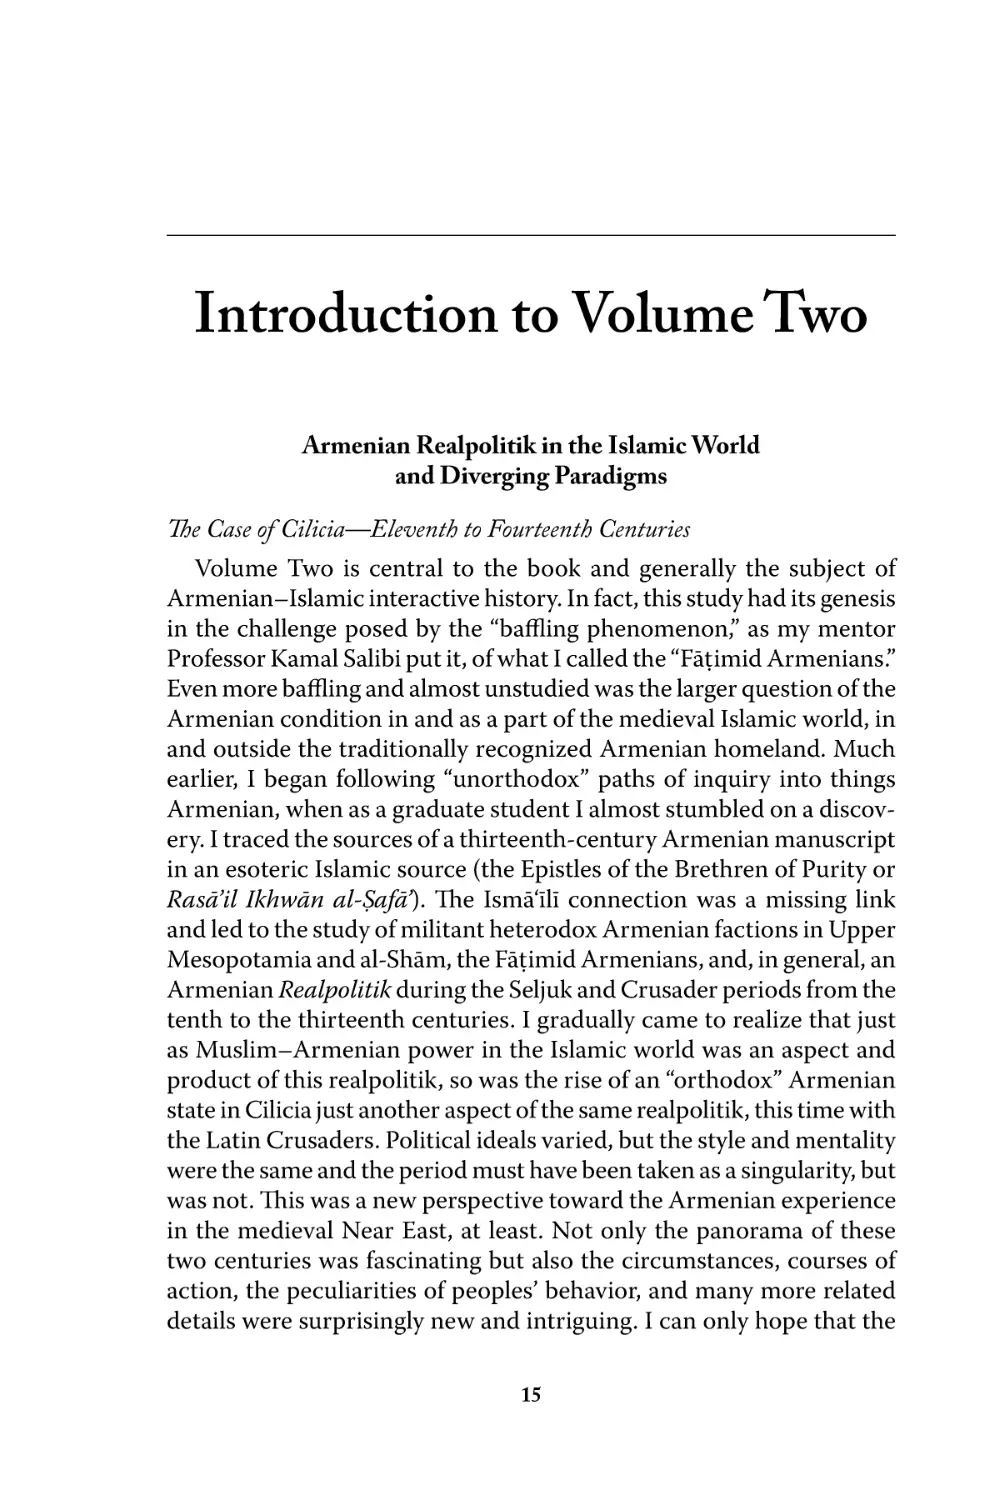 Introduction to Volume Two